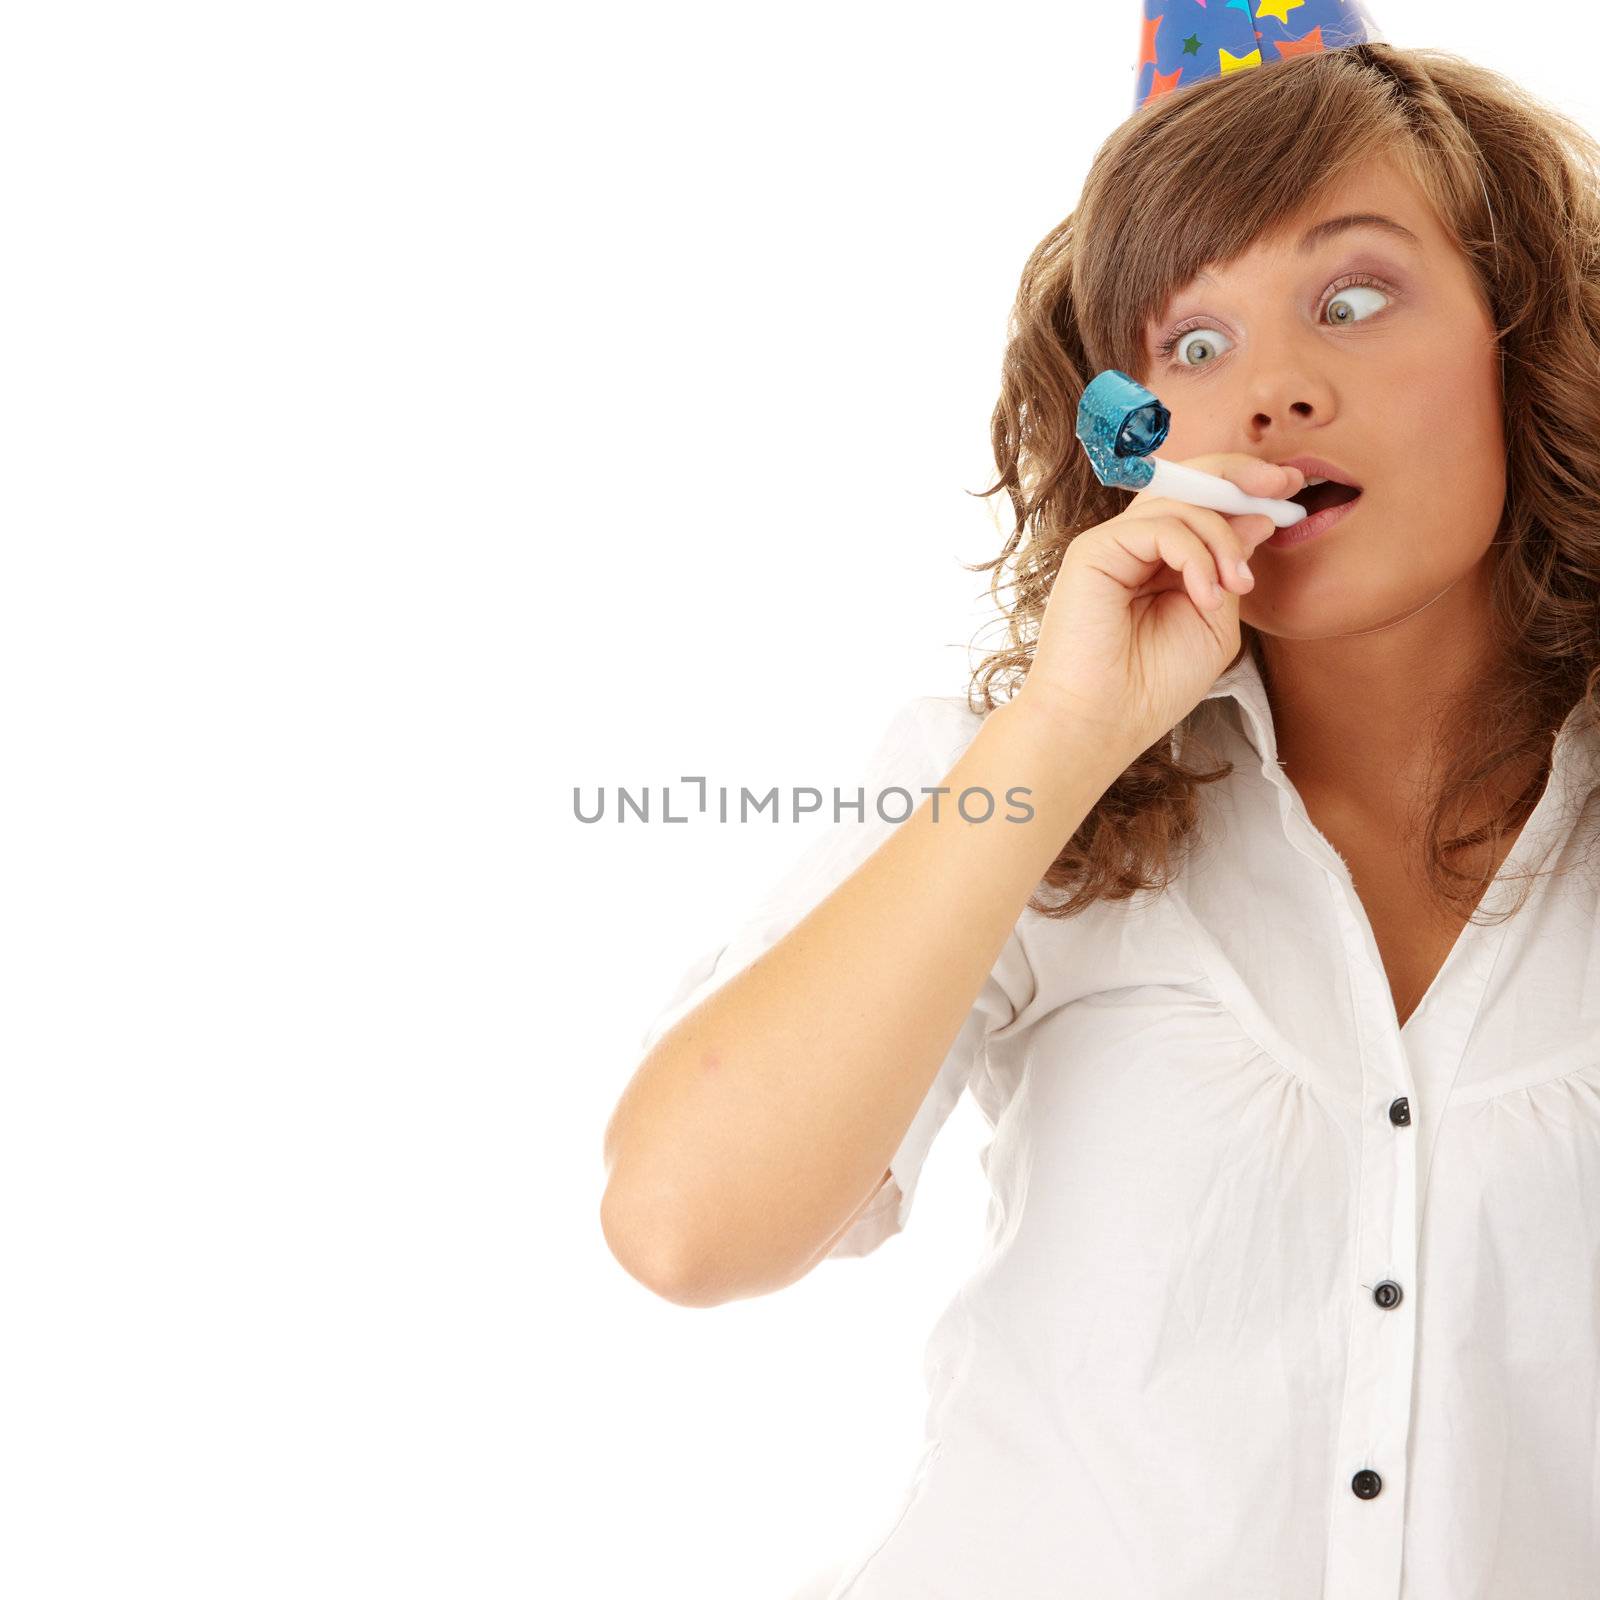 Young woman in business siut wearing party favors